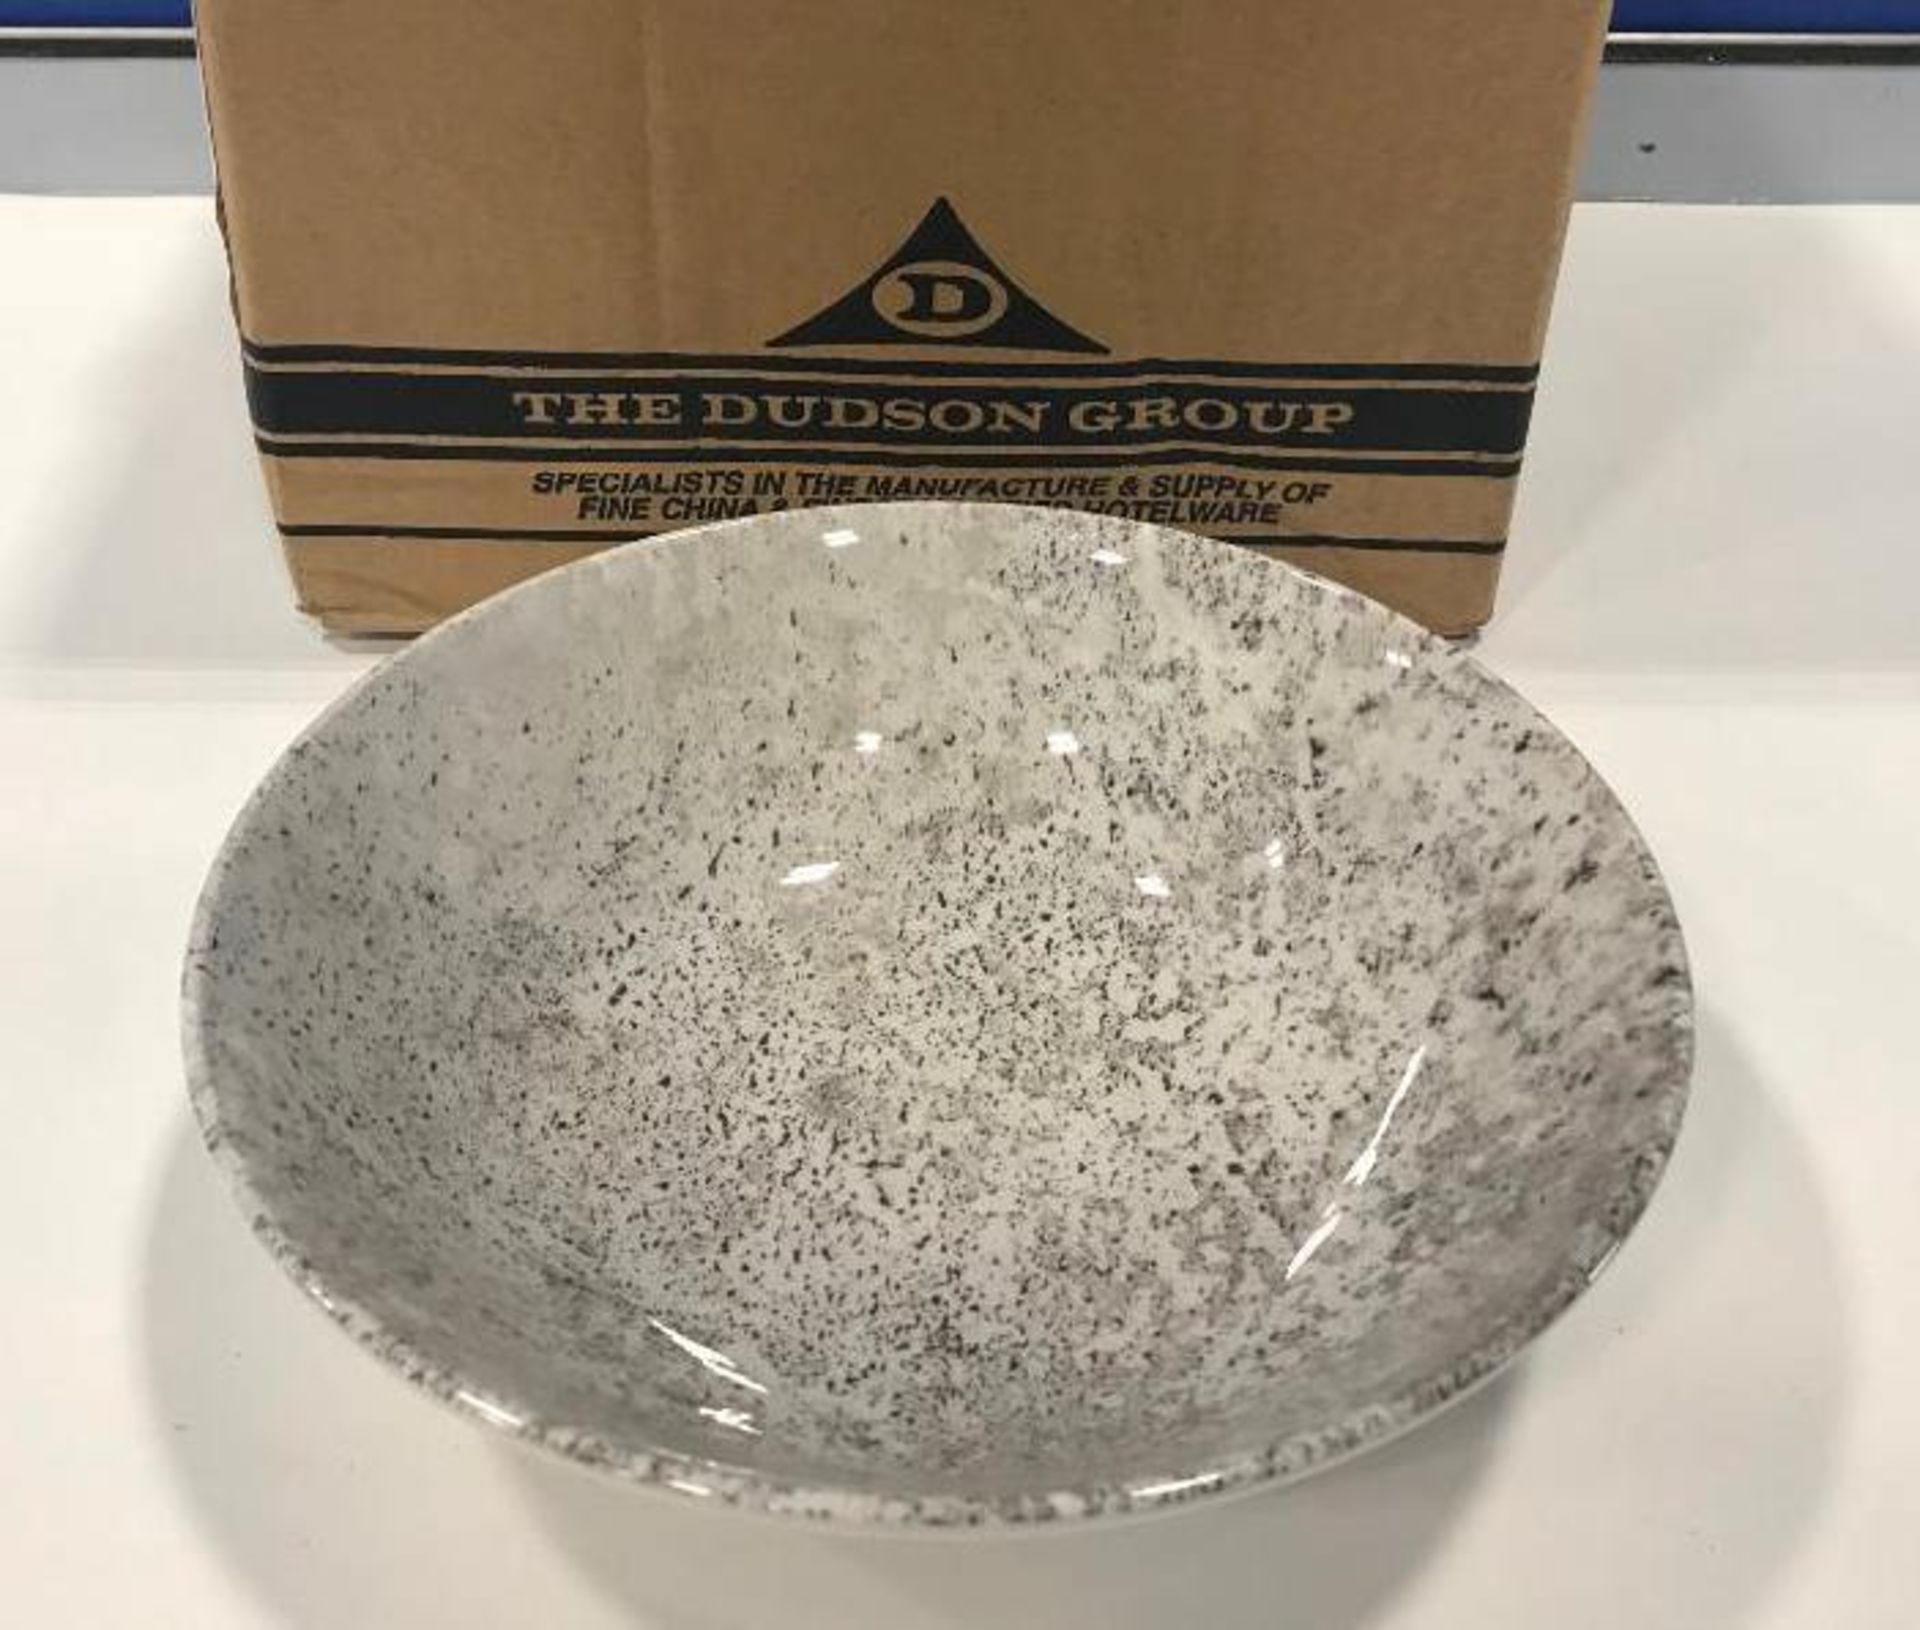 DUDSON CONCRETE CHEF'S BOWL 8" - 12/CASE, MADE IN ENGLAND - Image 2 of 5